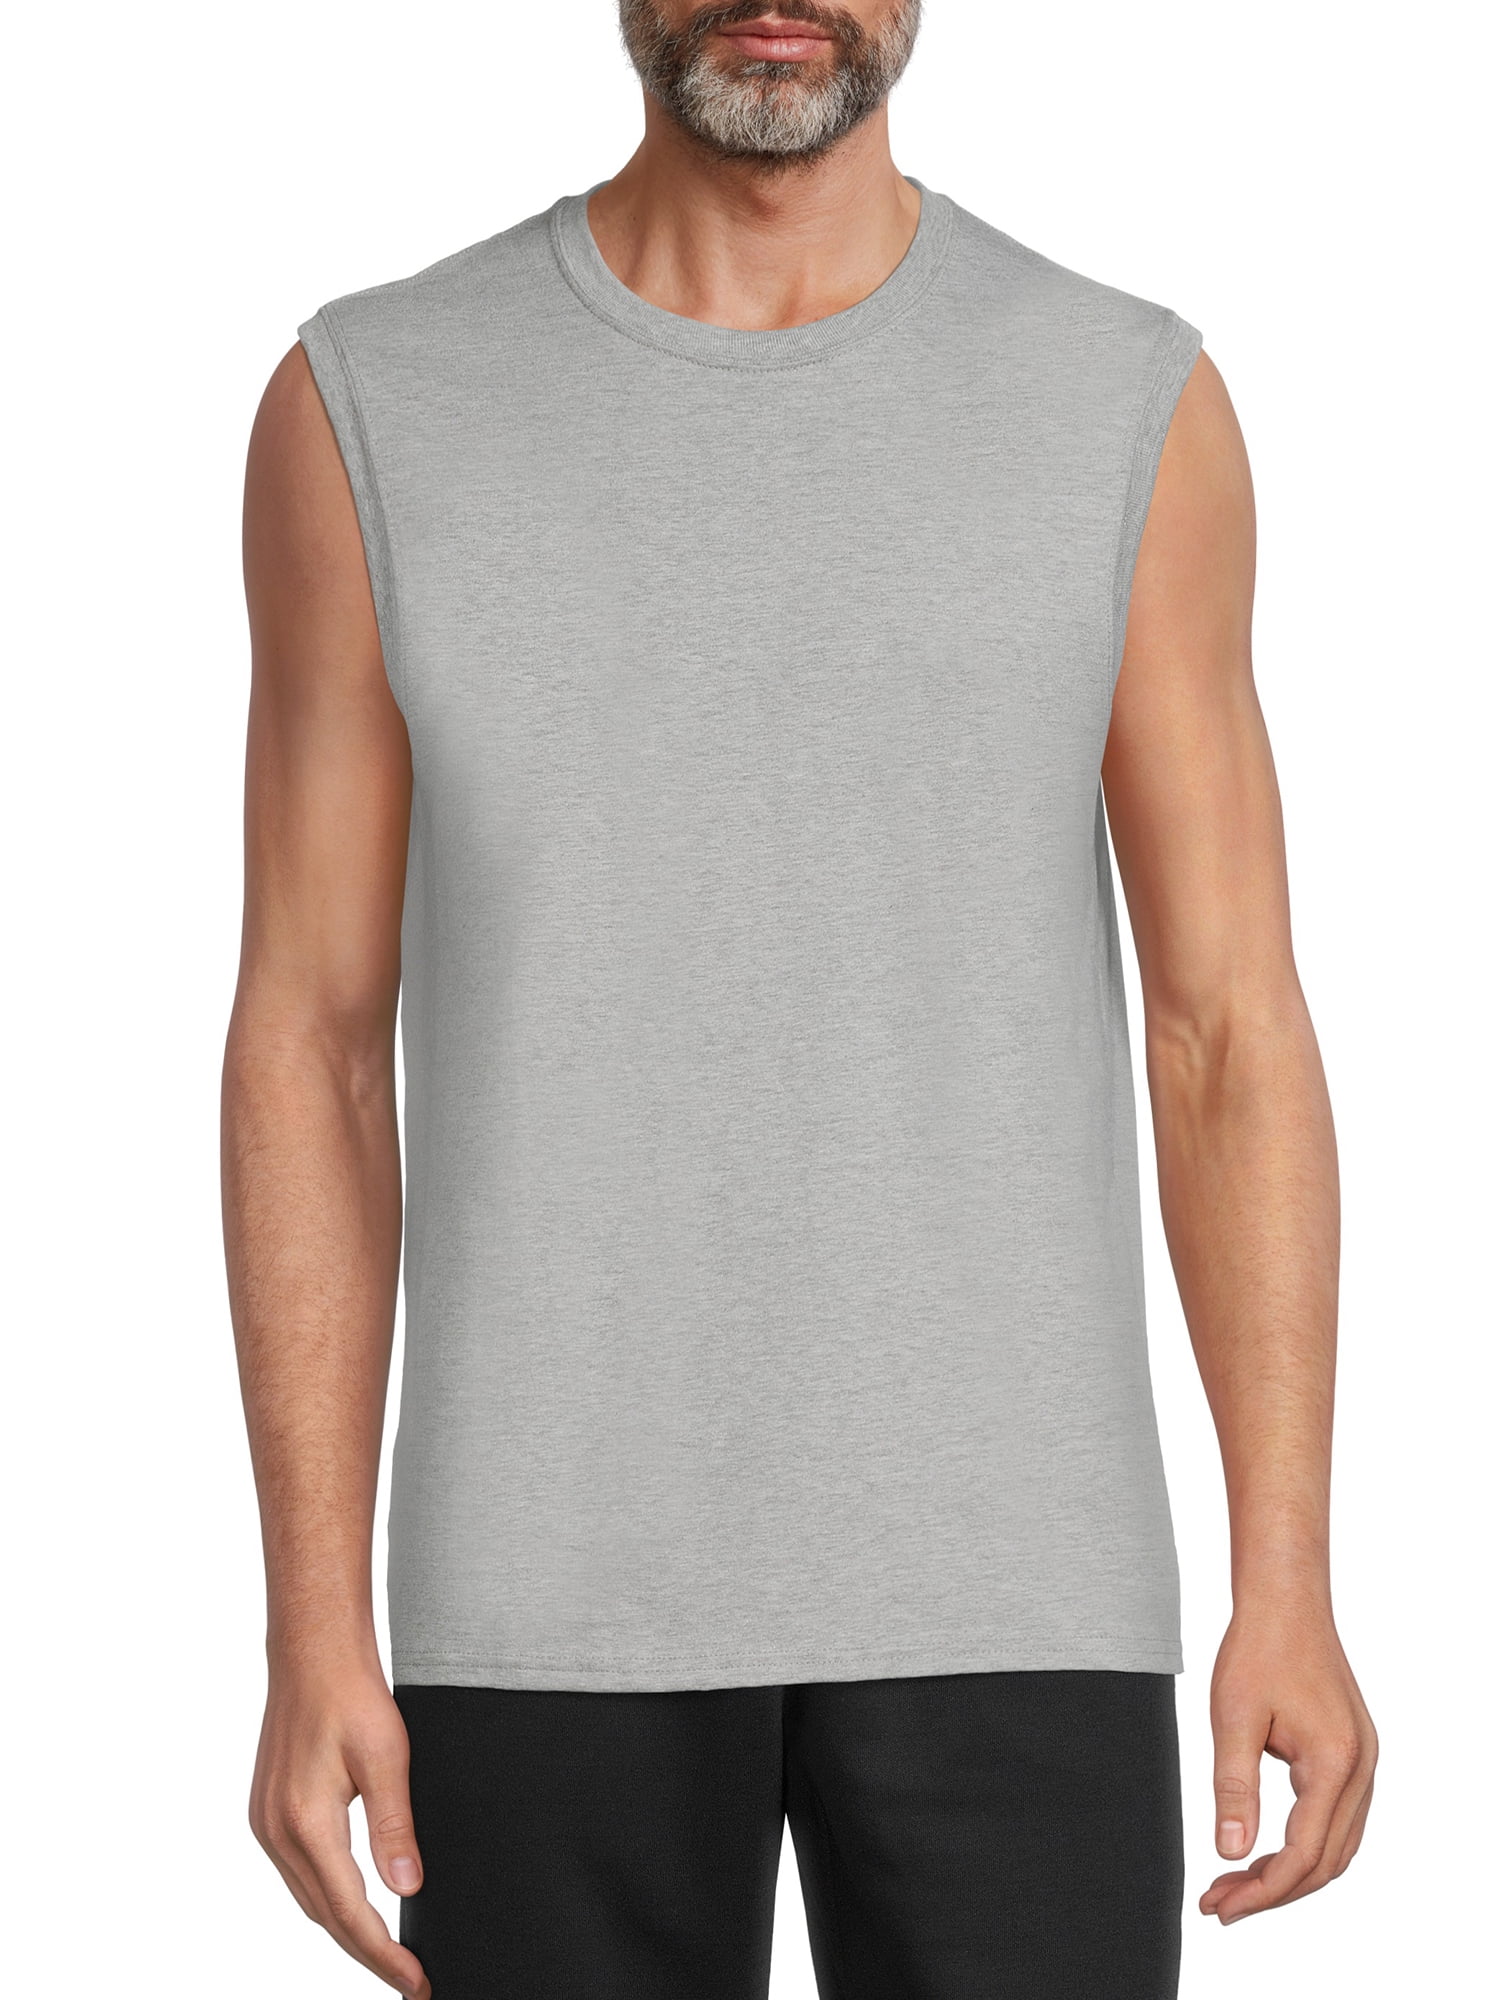 Athletic Works Men's and Big Men's Sleeveless Muscle T-Shirt 